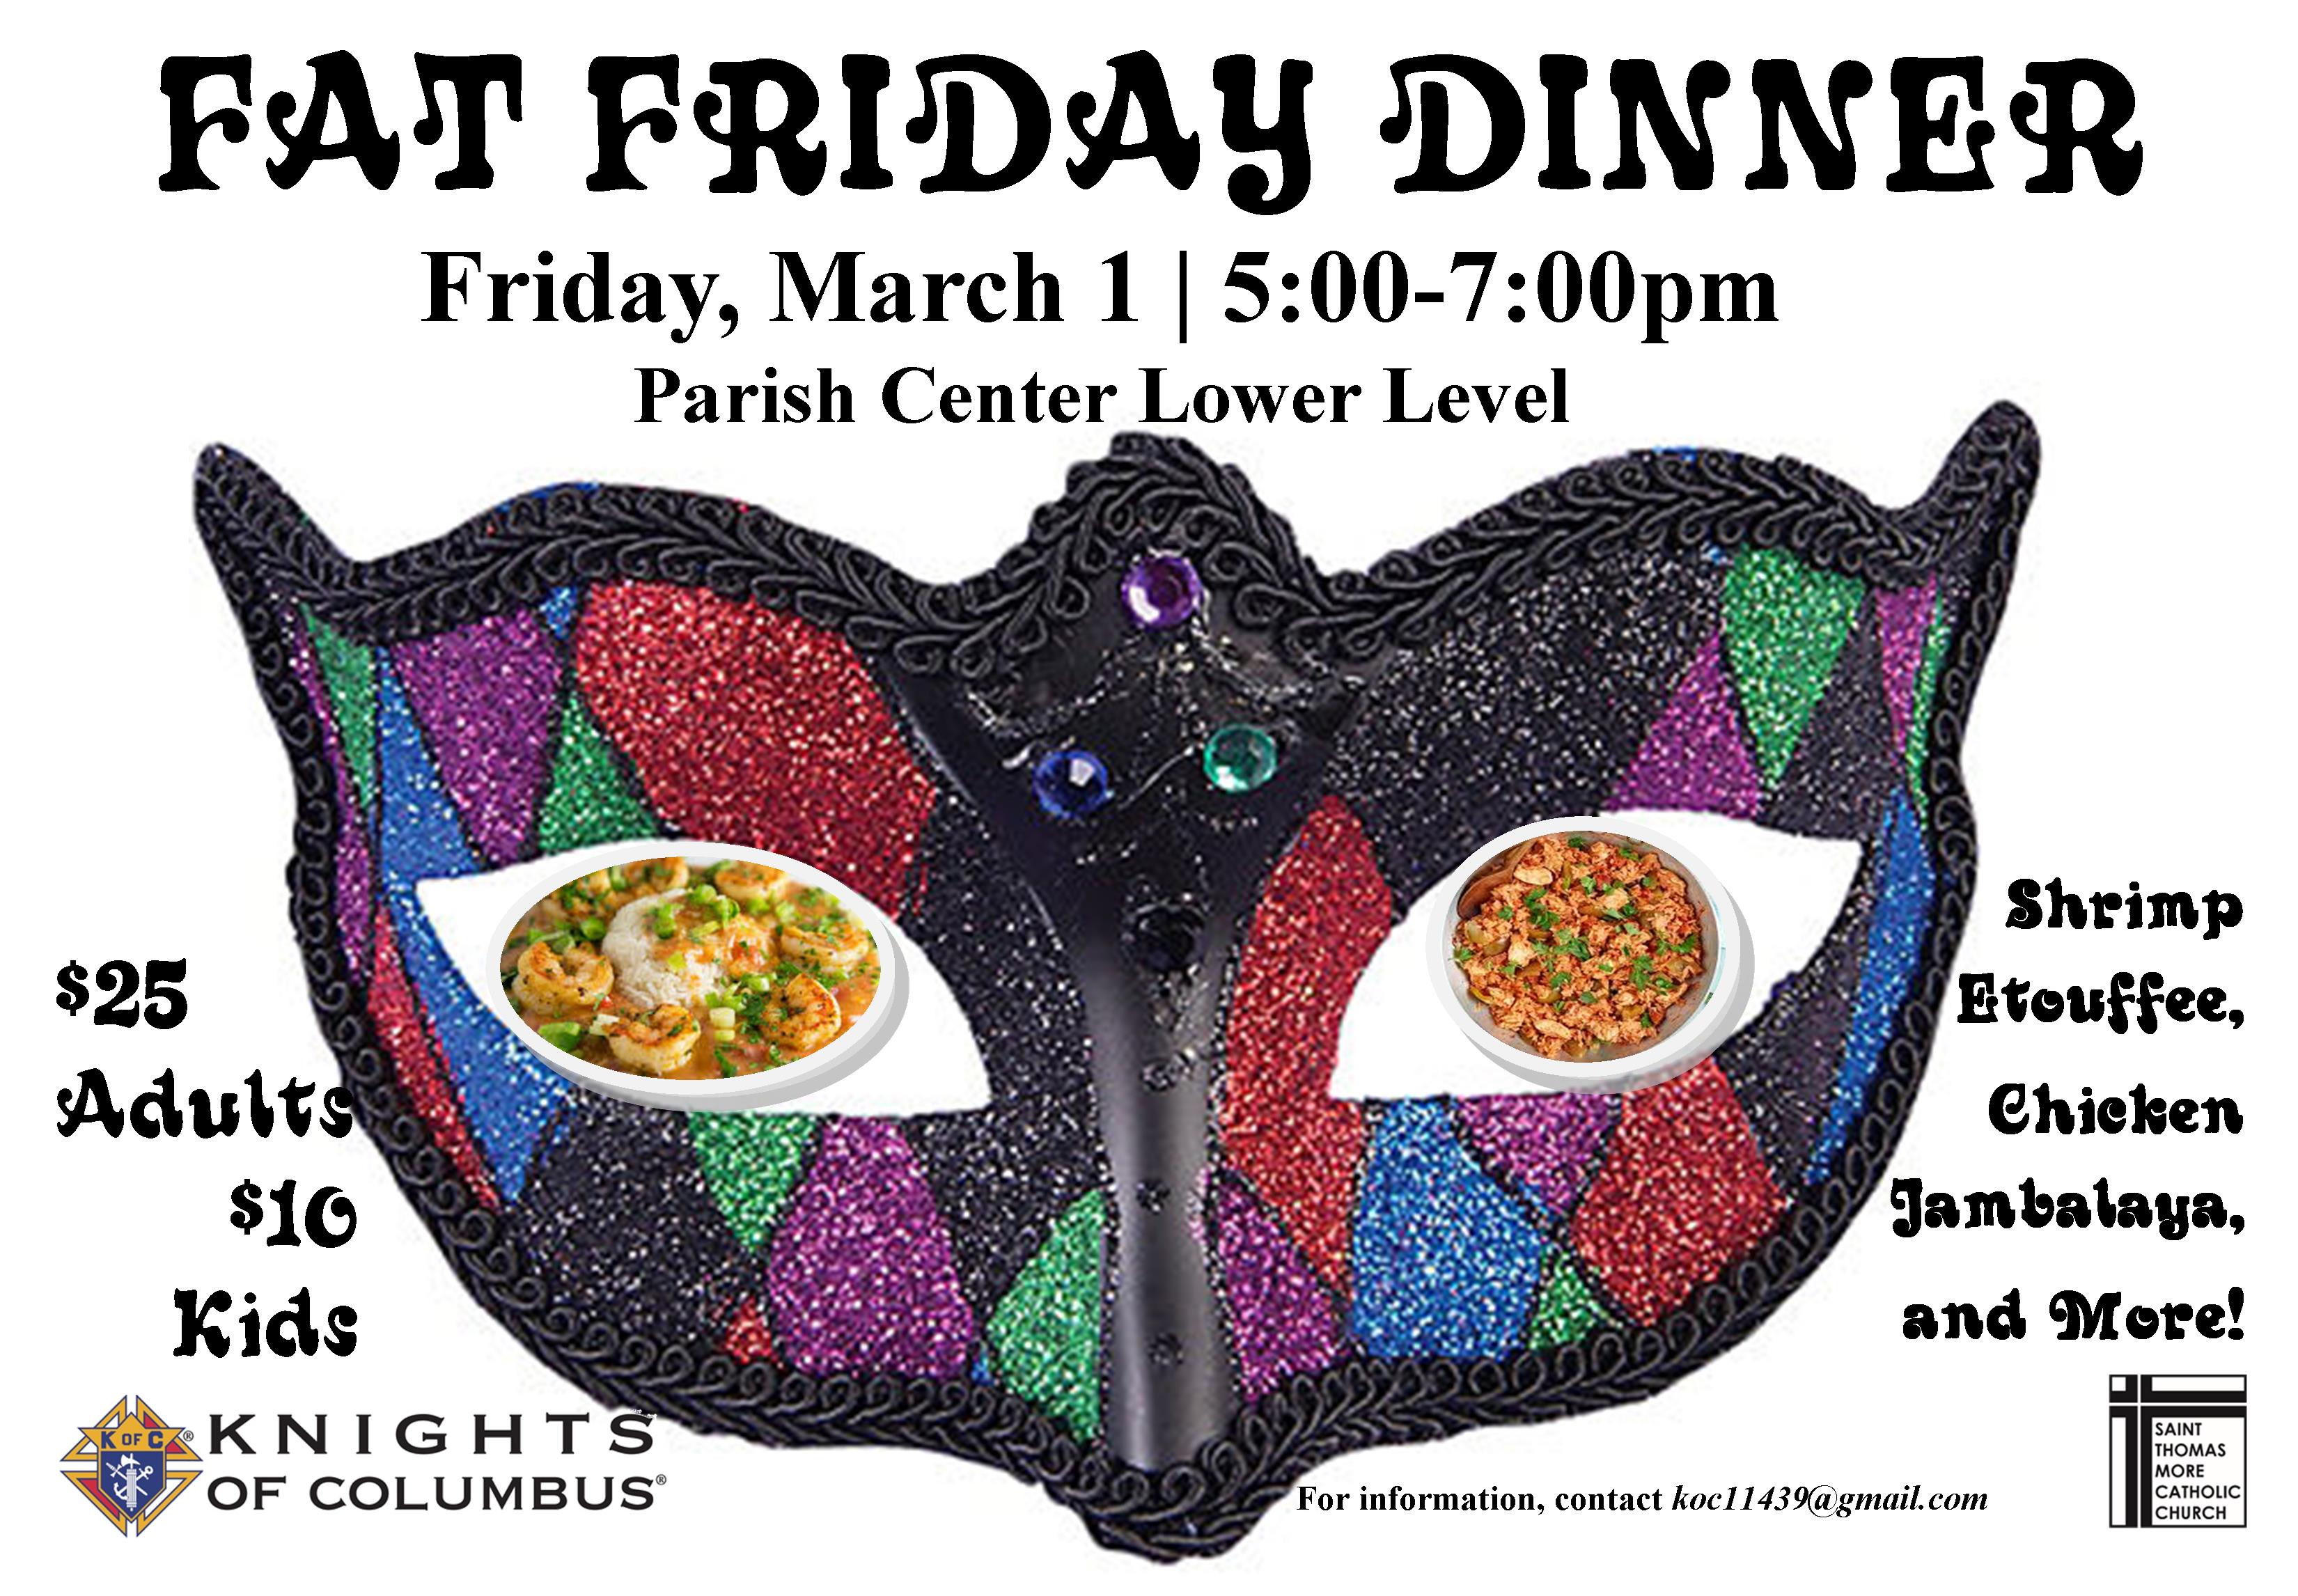 Knights of Columbus Fat Friday Party